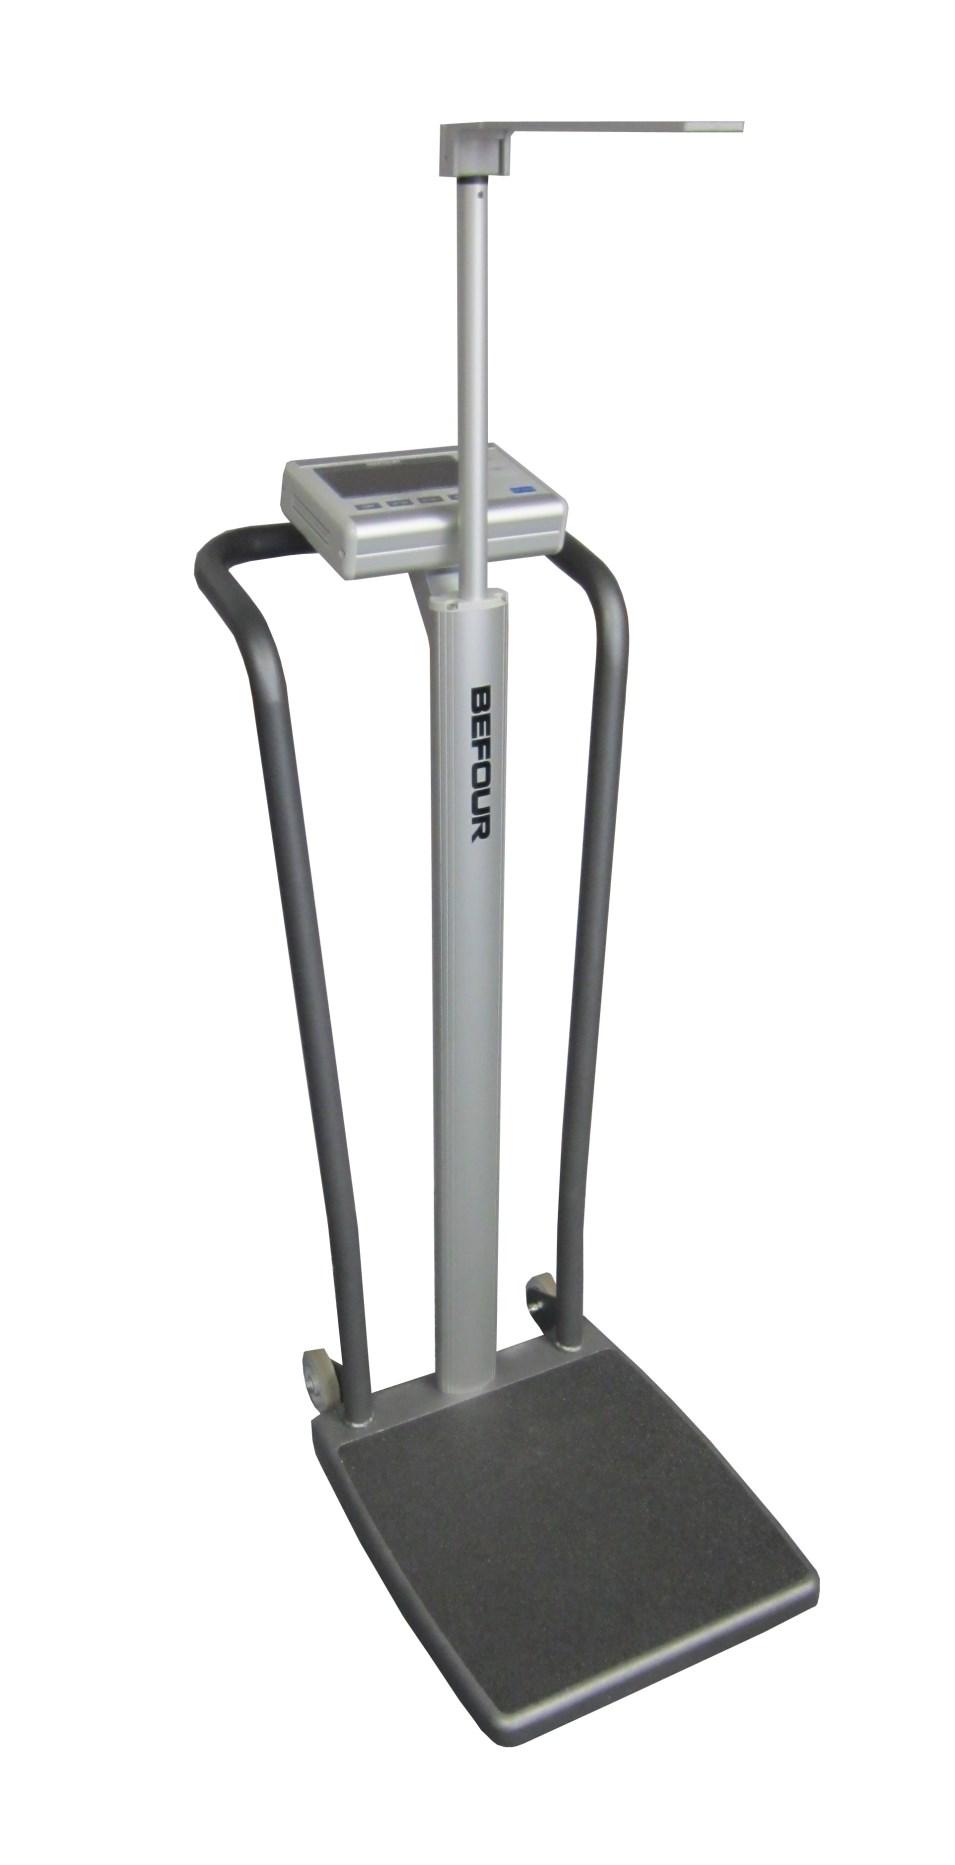 Professional Scales WH-1070 High Capacity Weight + Height Handrail Scale Befour, Inc.